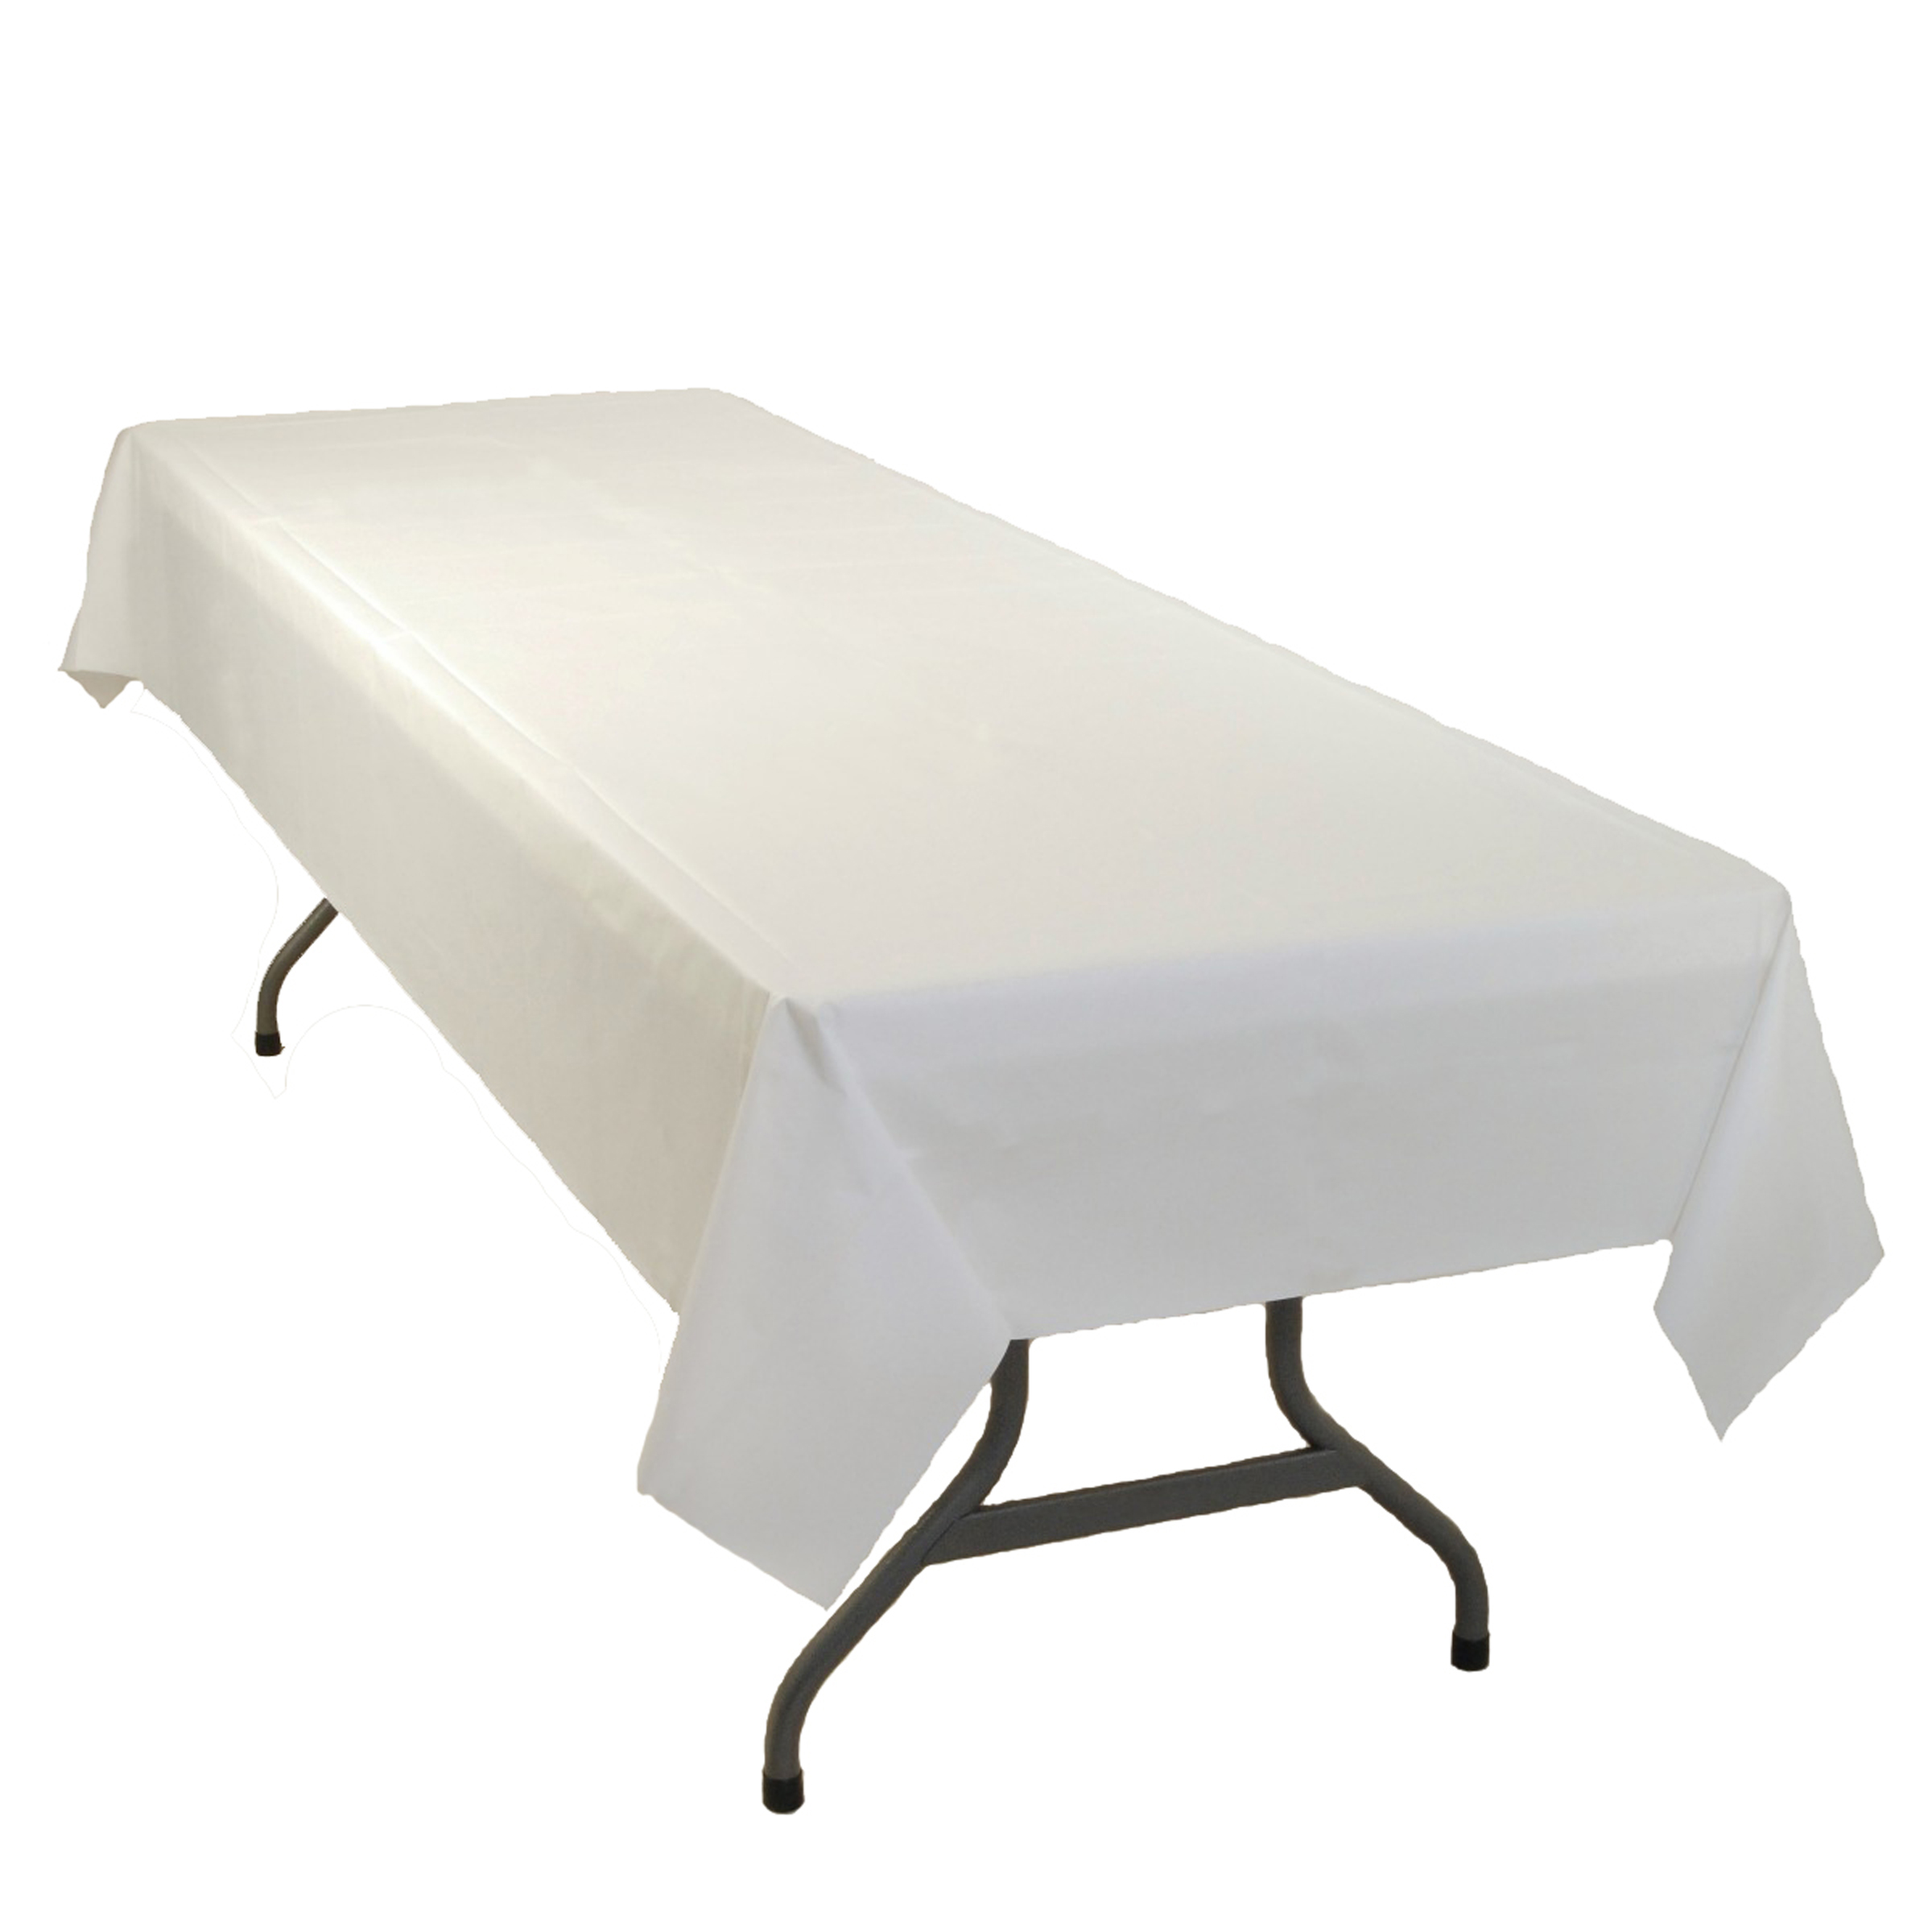 Plastic Tablecovers, Banquet Rolls and Skirting | Table Mate Products, Inc.